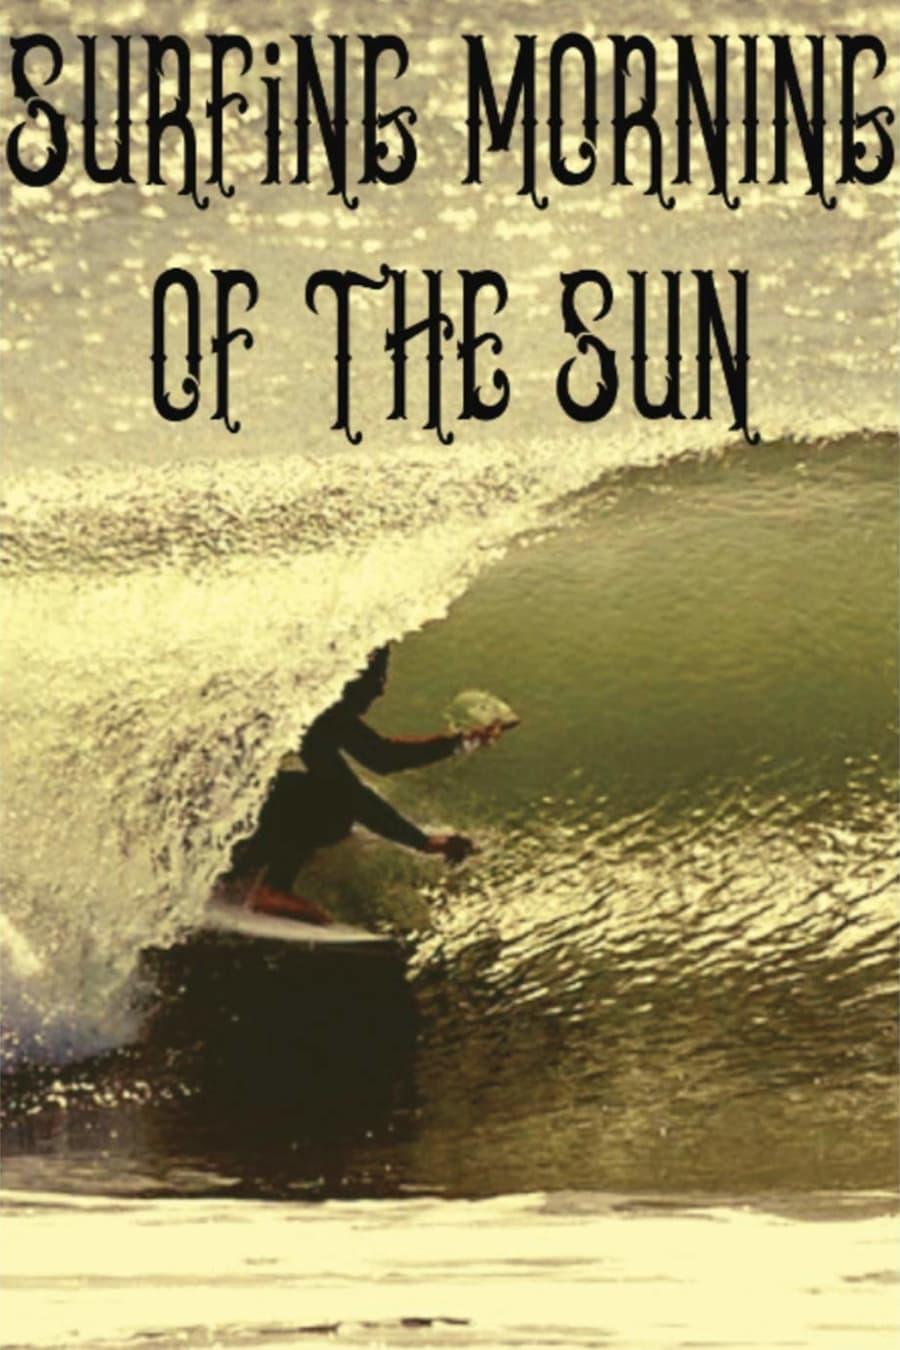 Surfing Morning of the Sun poster